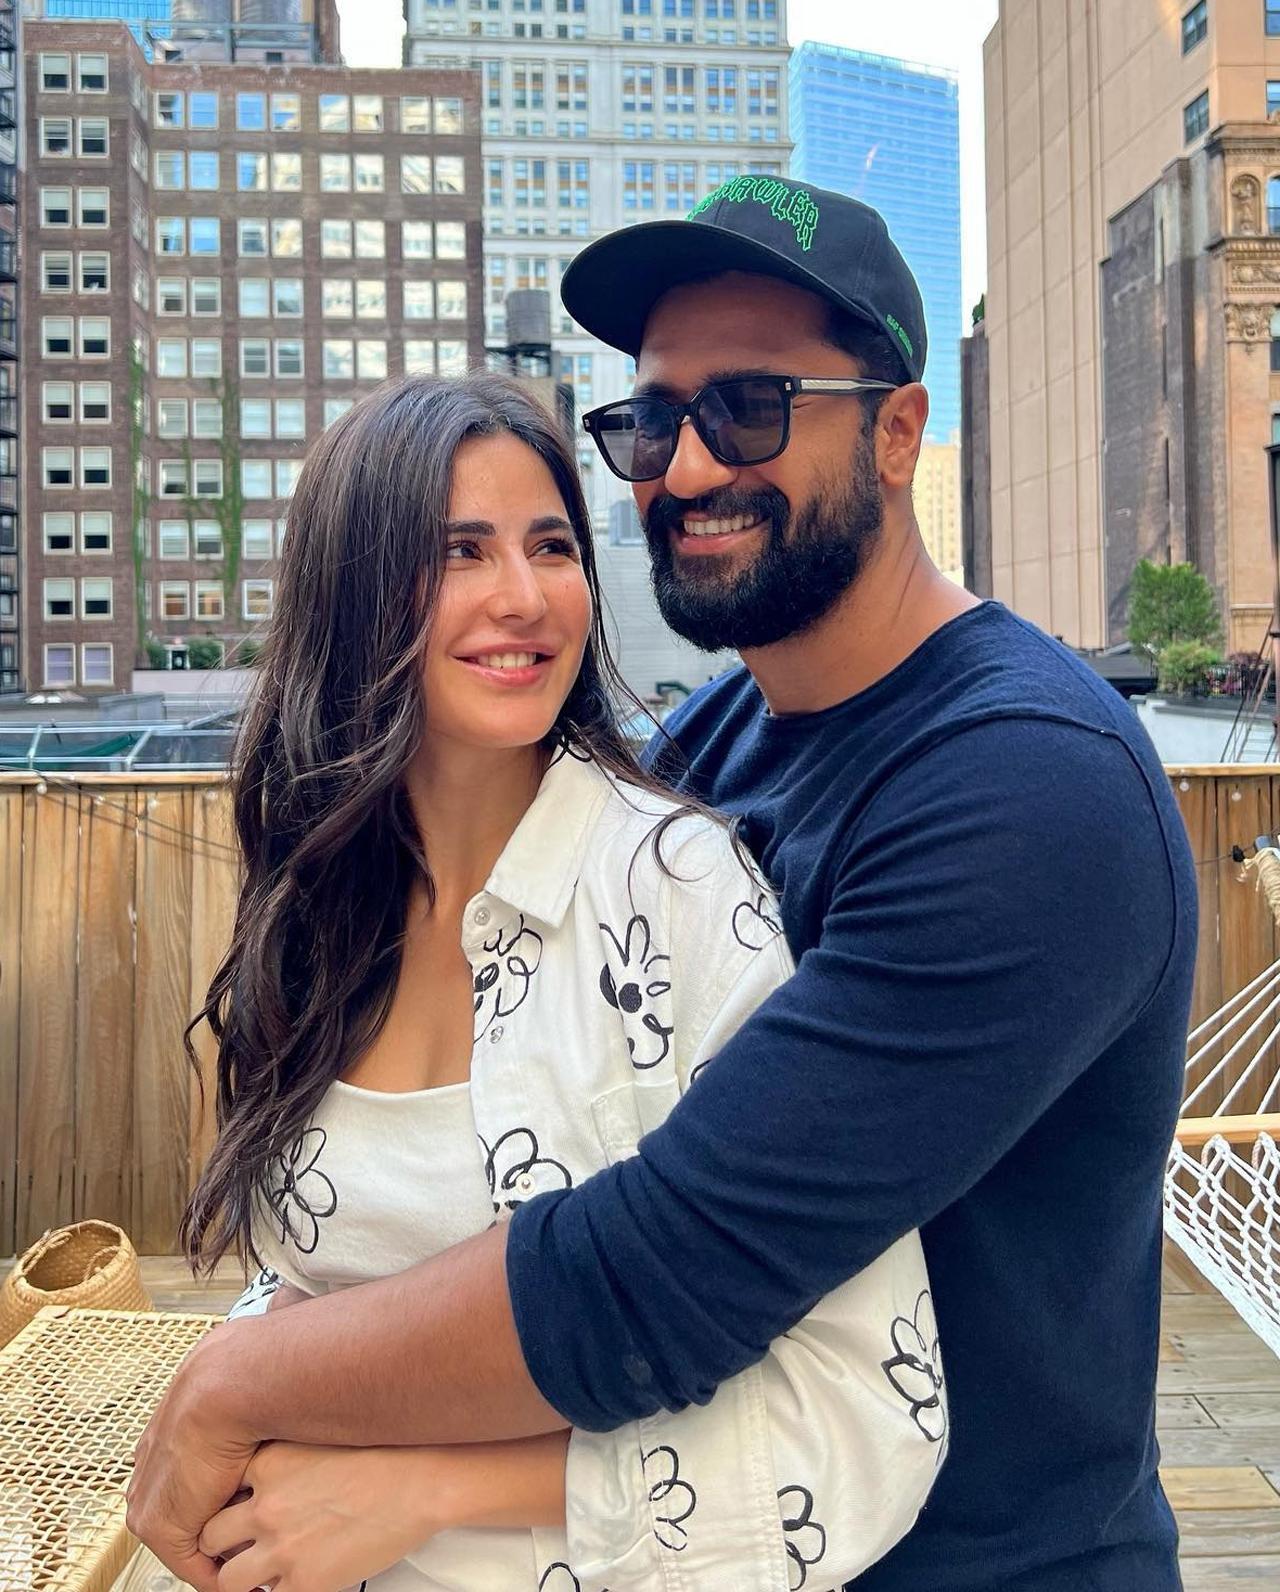 Katrina Kaif and Vicky Kaushal are currently holidaying in New York. The power couple visited Priyanka Chopra's New York restaurant called Sona on Thursday. Meanwhile, on the work front, both Vicky and Katrina have an interesting movie lineup. Vicky Kaushal will star in 'Govinda Nam Mera' with Boomi Pedneker and Kiara Advani. He also owns an untitled movie of Laxman Utekar starring Sara Ali Khan. Vicky will appear in 'Sam Bahadur' of Meghna Gulzar. On the other hand, talking about Katrina Kaif, the actor has 'Tiger 3' in the pipeline, starring Salman Khan. She also has a horror-comedy 'PhoneBhoot' starring Siddhant Chaturvedi and Ishaan Khatter.